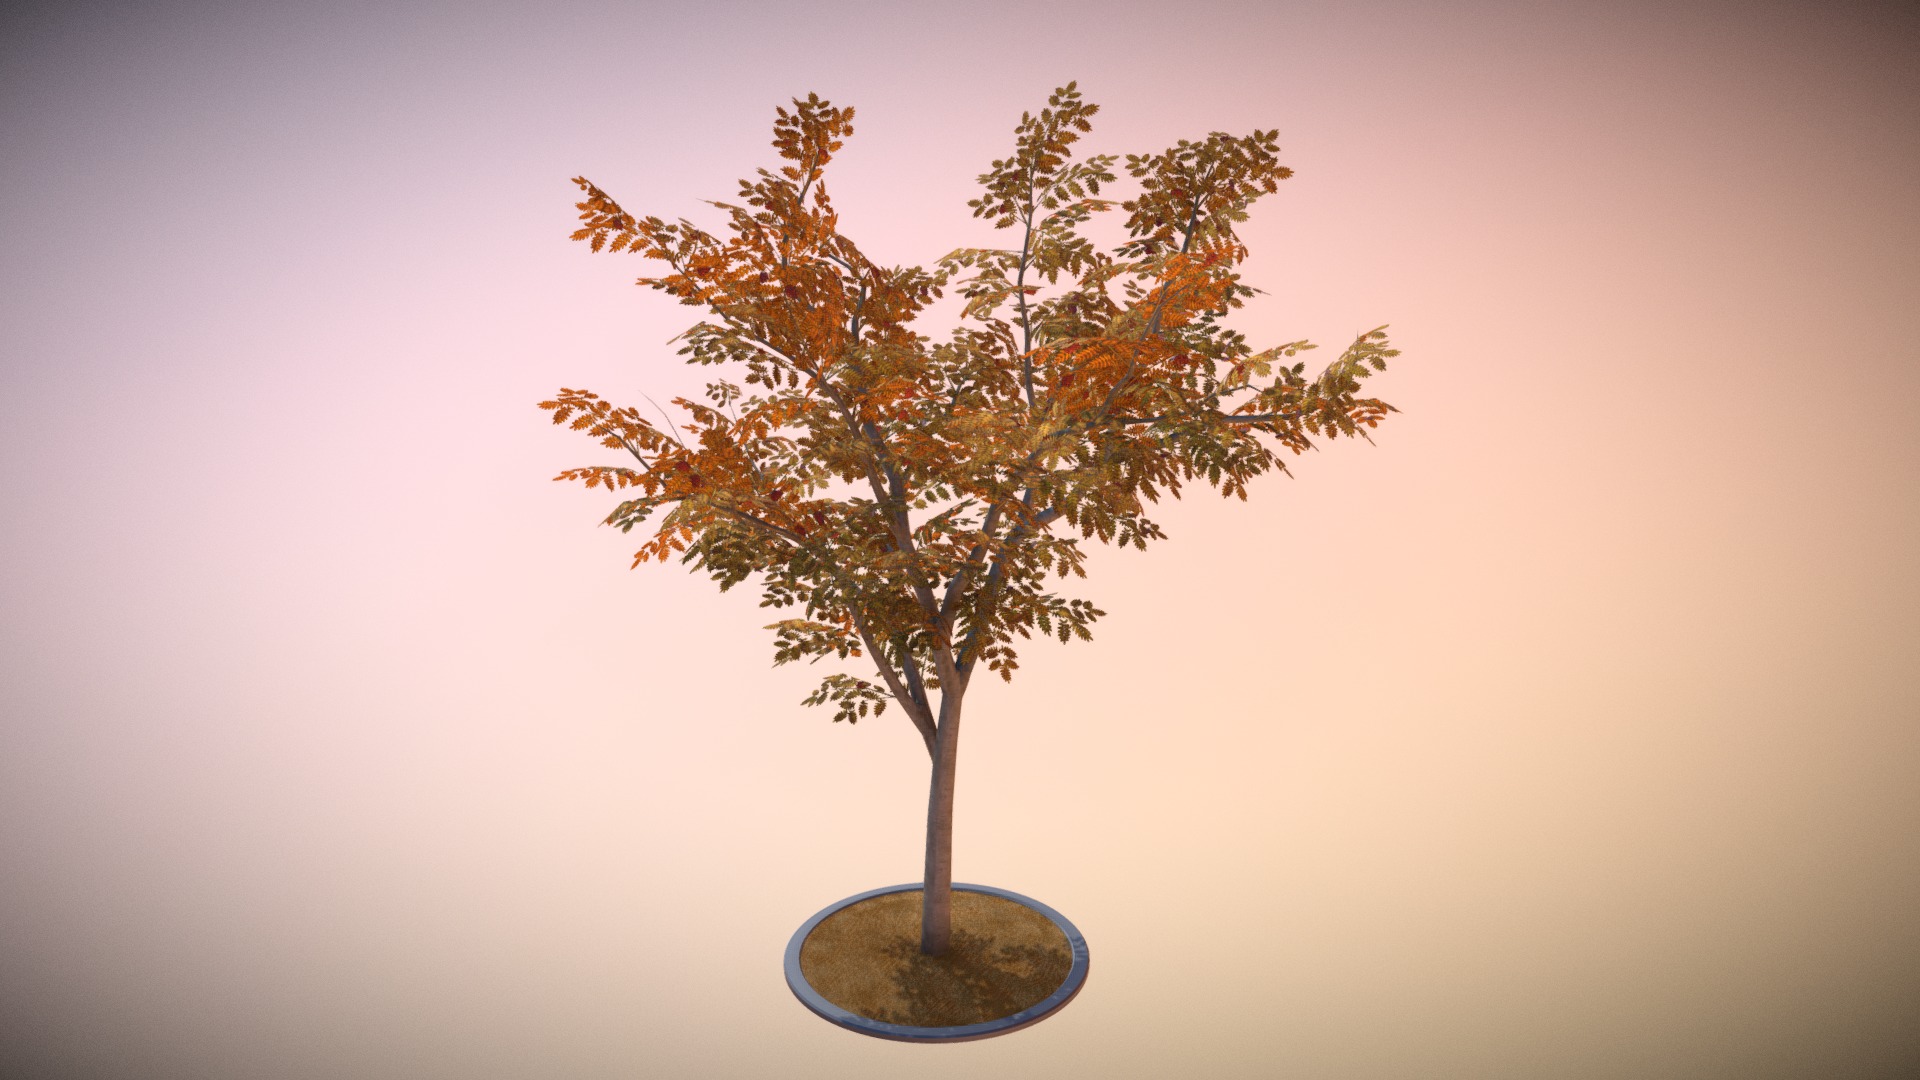 3D model Rowan Tree – Sorbus-Aucuparia – 12m – Autumn - This is a 3D model of the Rowan Tree - Sorbus-Aucuparia - 12m - Autumn. The 3D model is about a tree with a blue circle in the middle.